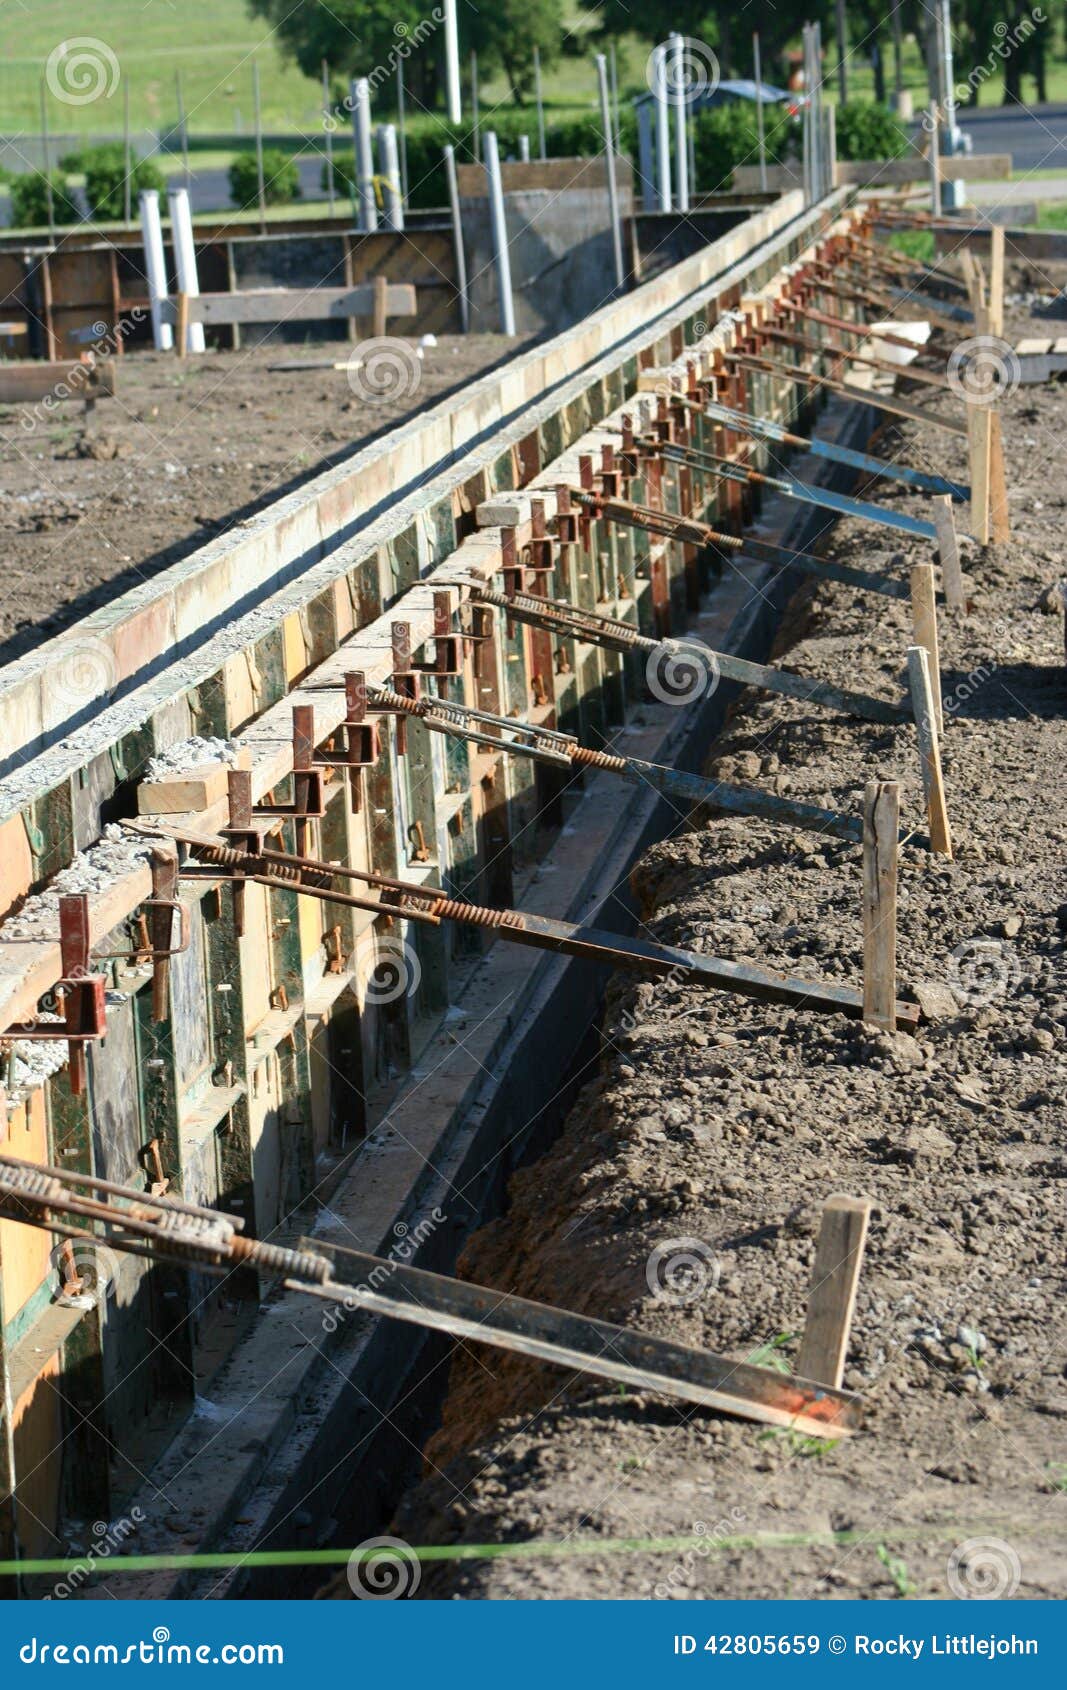 Adjustable wall forms stock image. Image of construction - 42805659